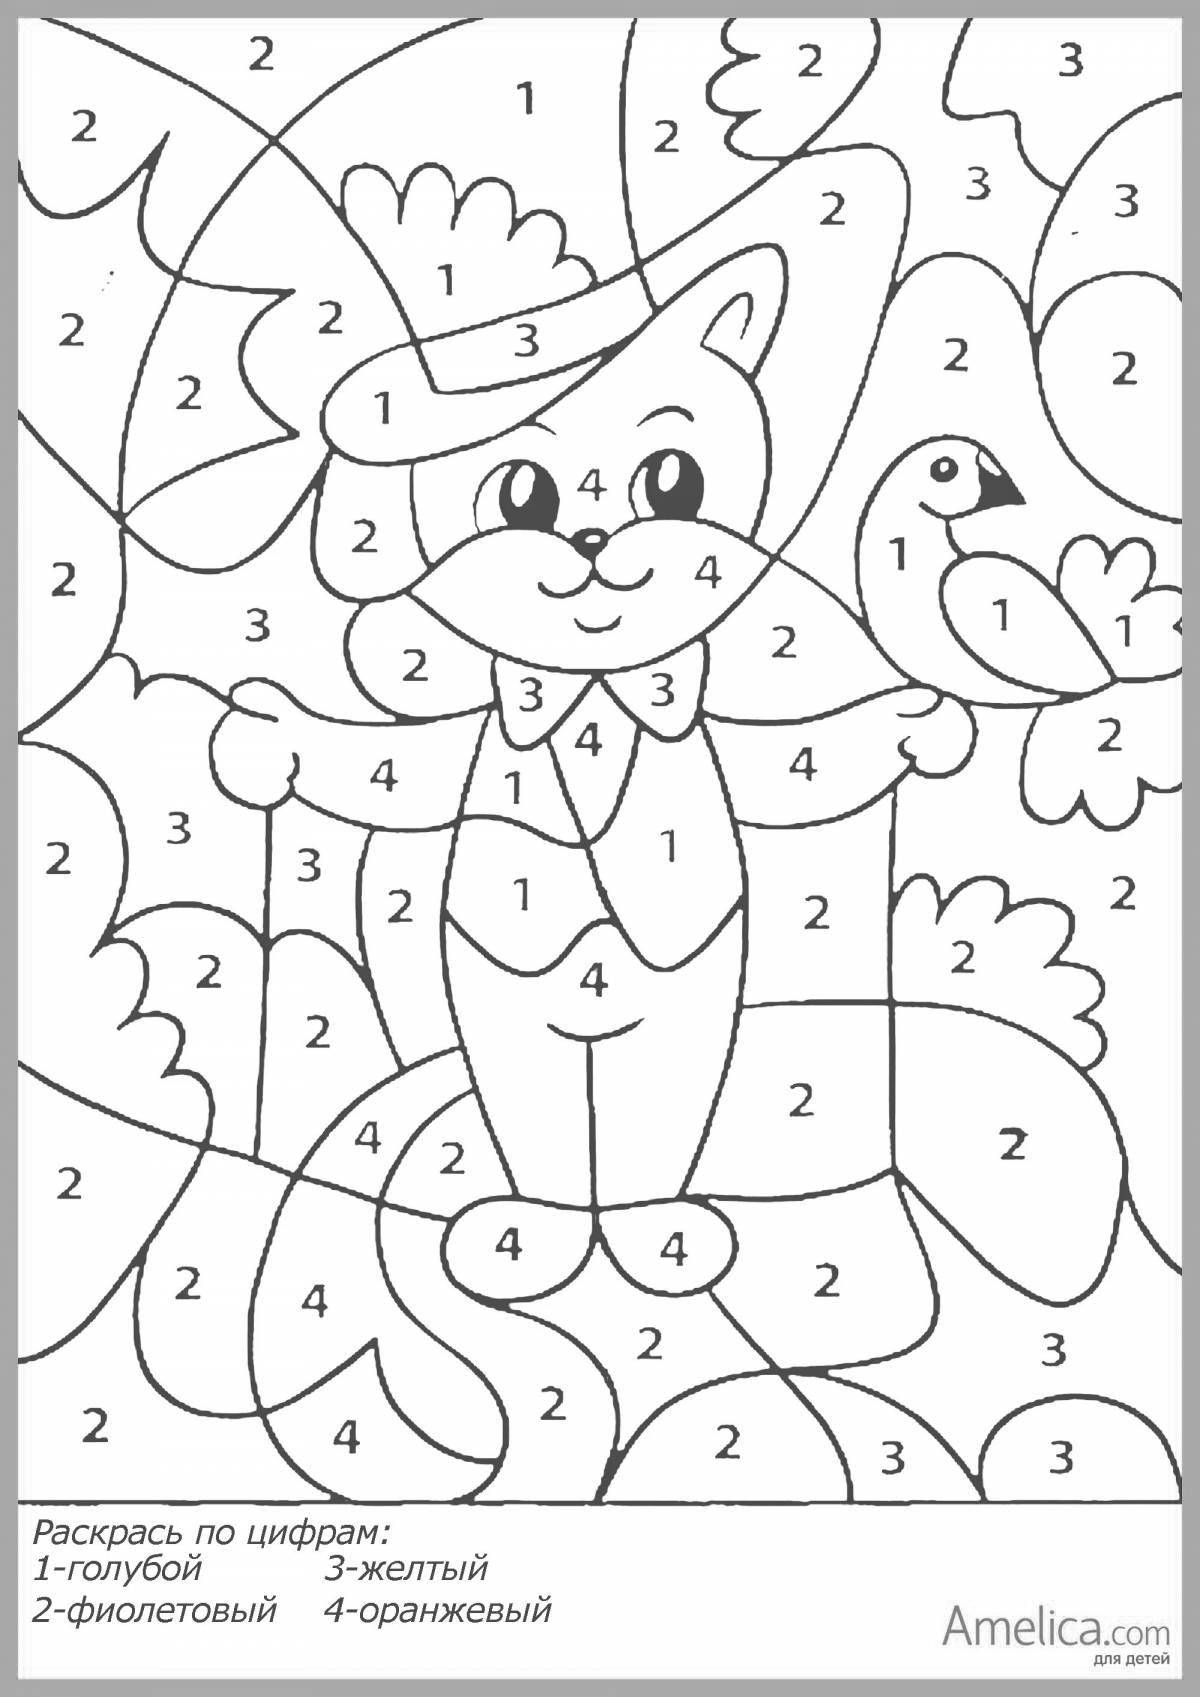 Colorful Luminous Paint by Number Coloring Page